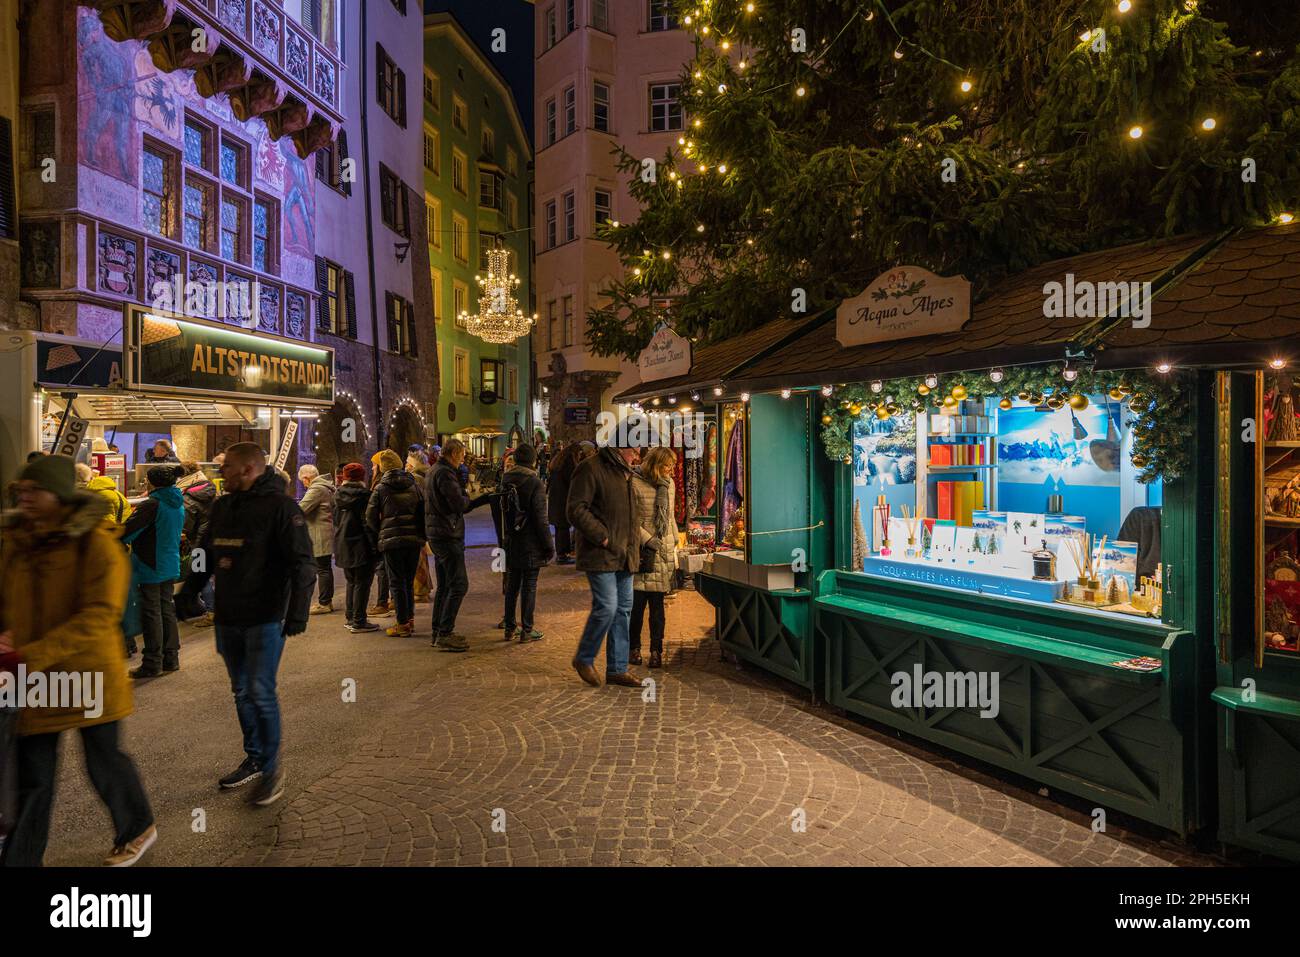 The beautiful and colorful Innsbruck Christmas market in Austria. Stock Photo